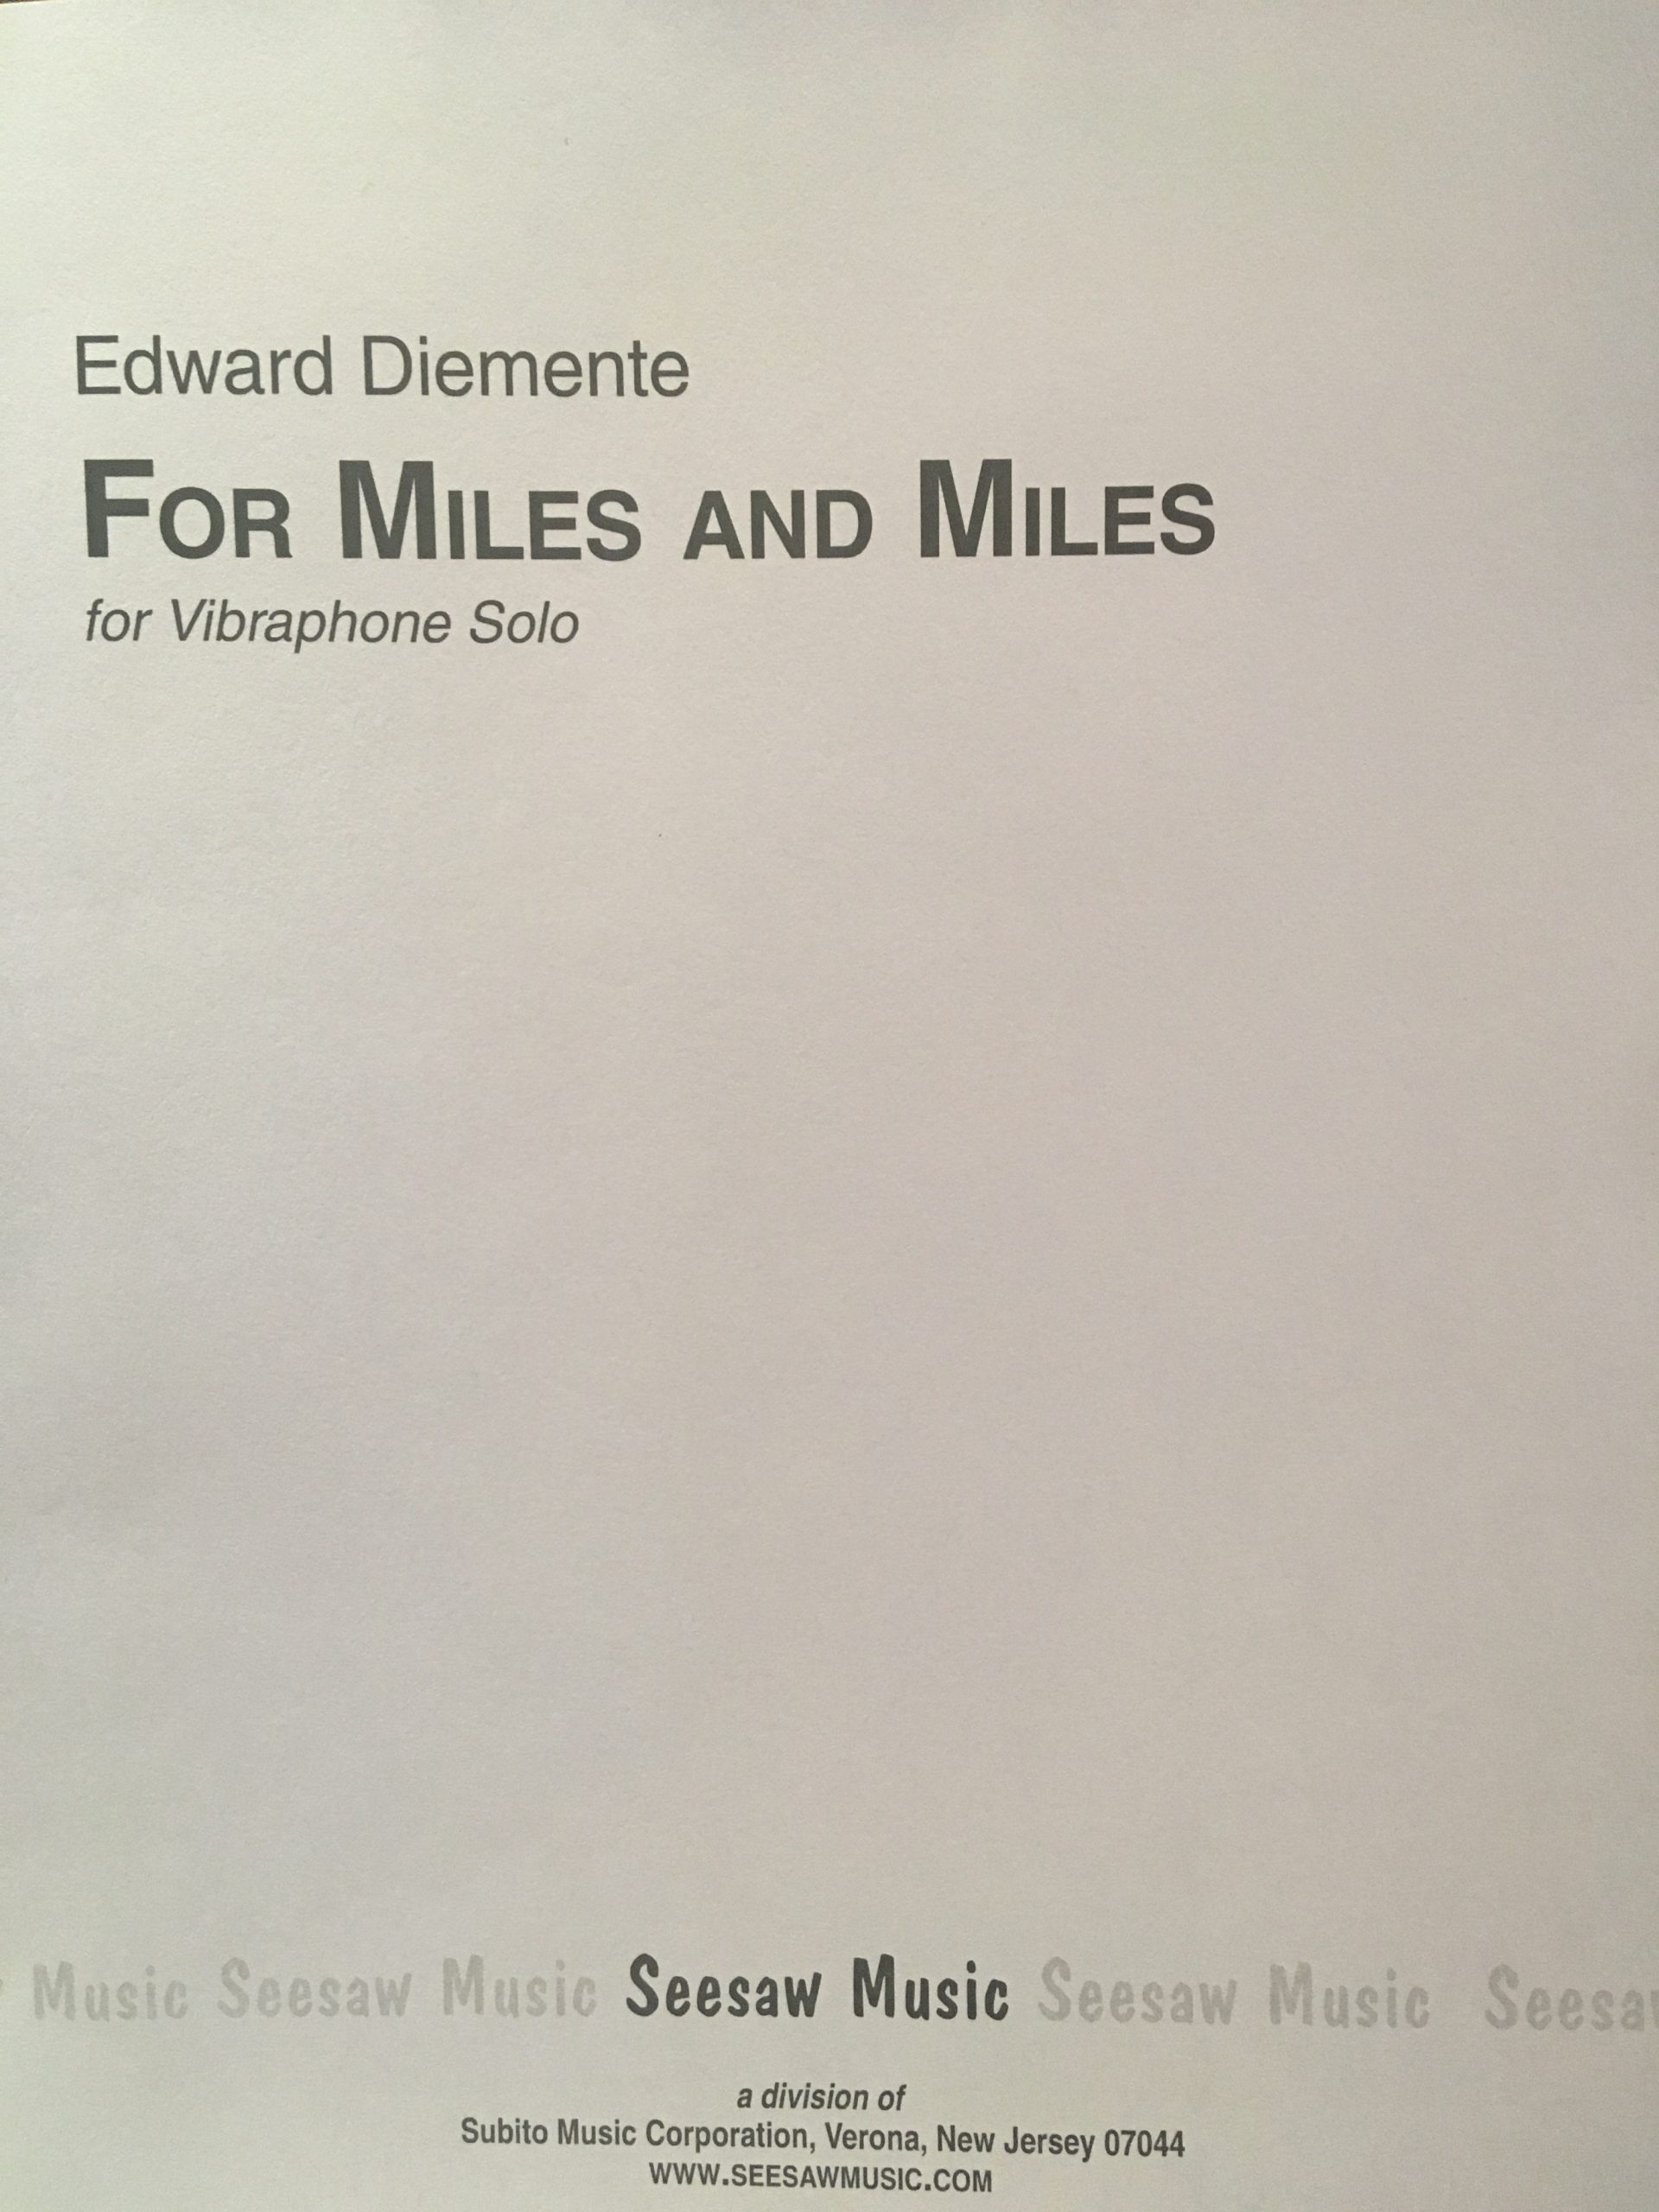 For Miles and Miles by Edward Diemente